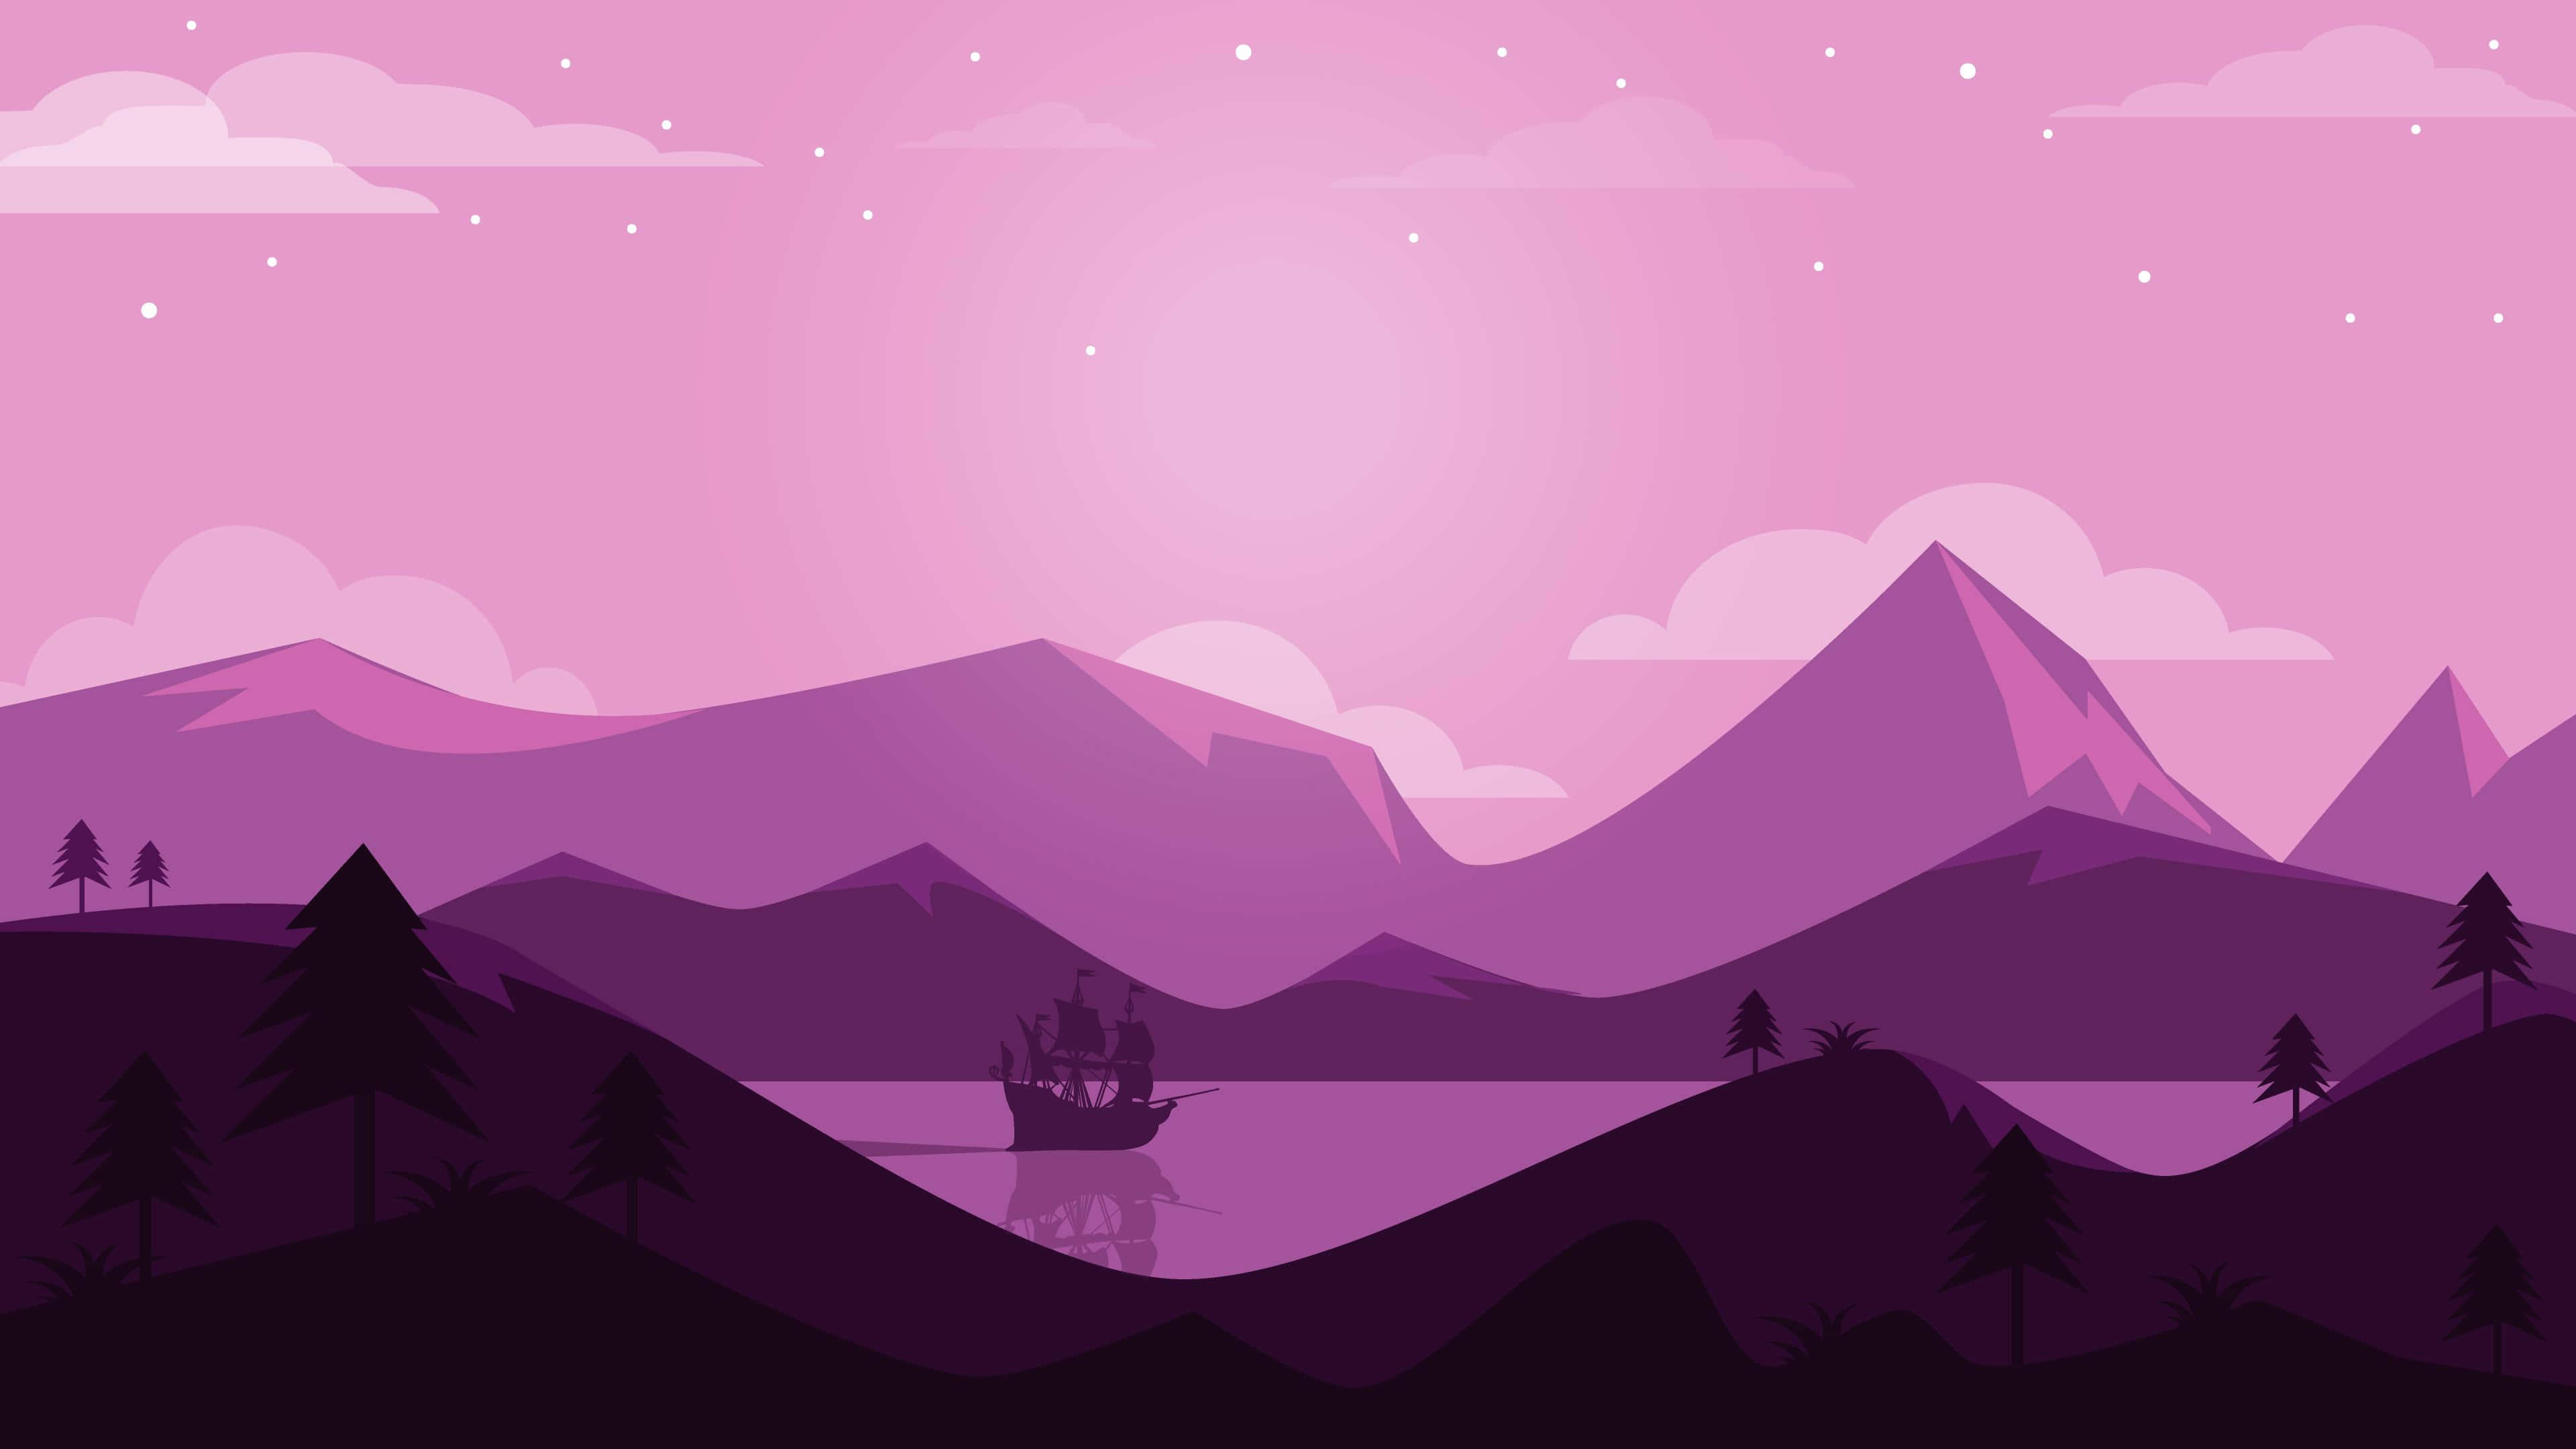 "Soaring Views Over Purple-Laced Mountains" Wallpaper